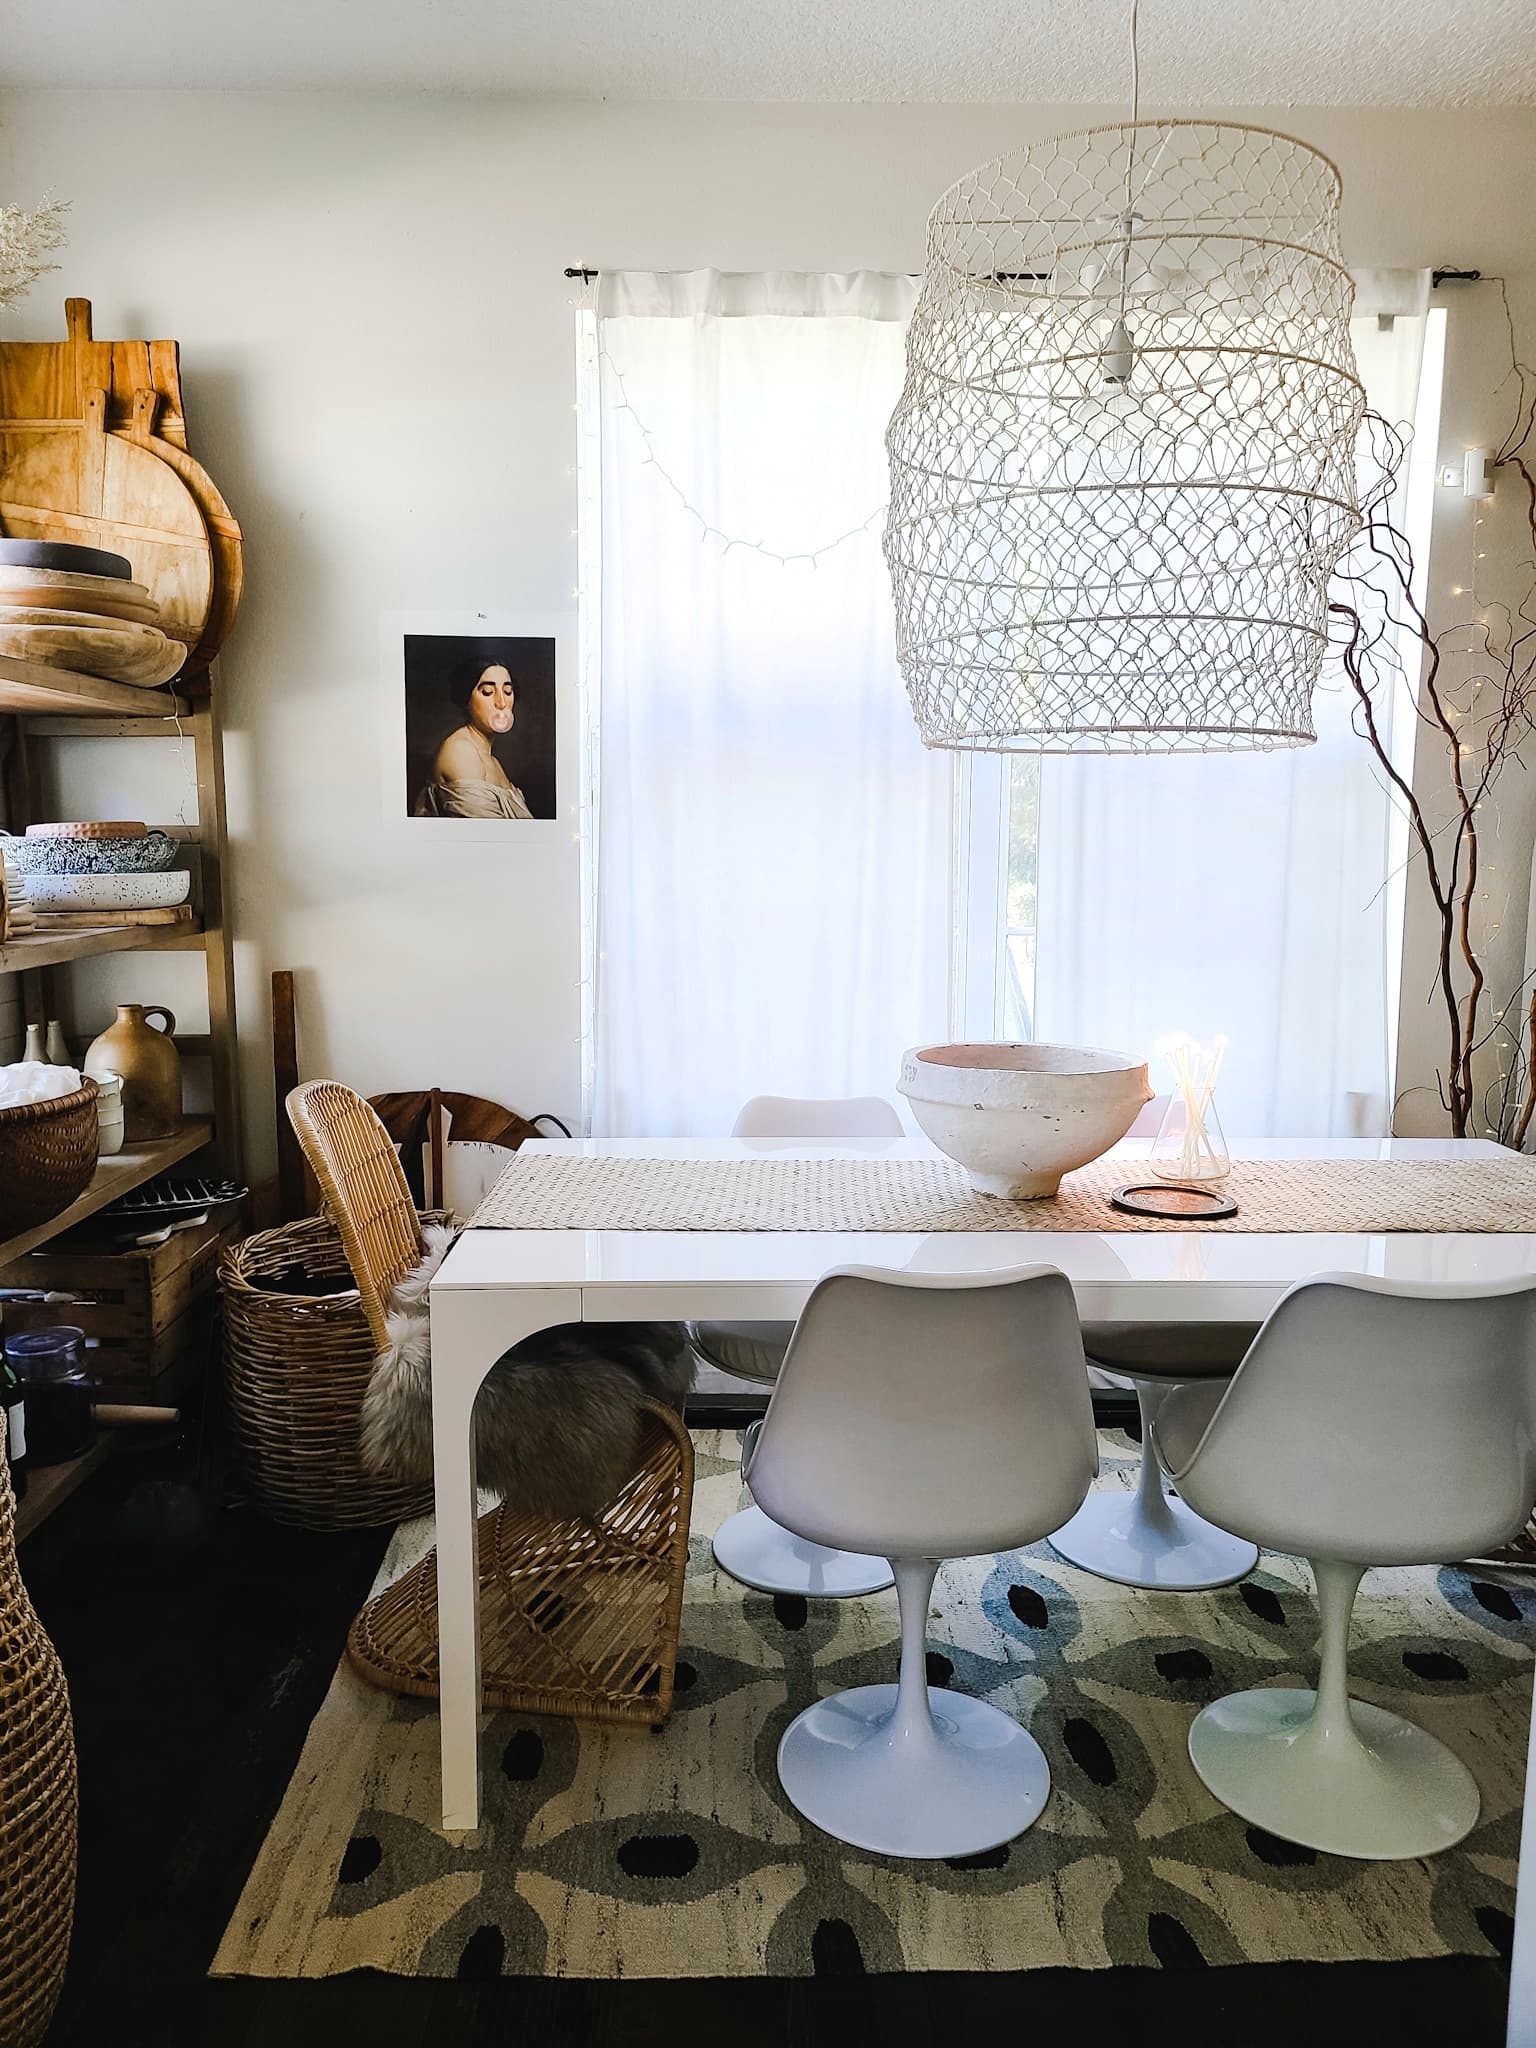 Scandinavian Modern Hygge style white dining room with candles texture woods and whites. Kitchen decor, vintage rugs, cane cabinet and open shelving.